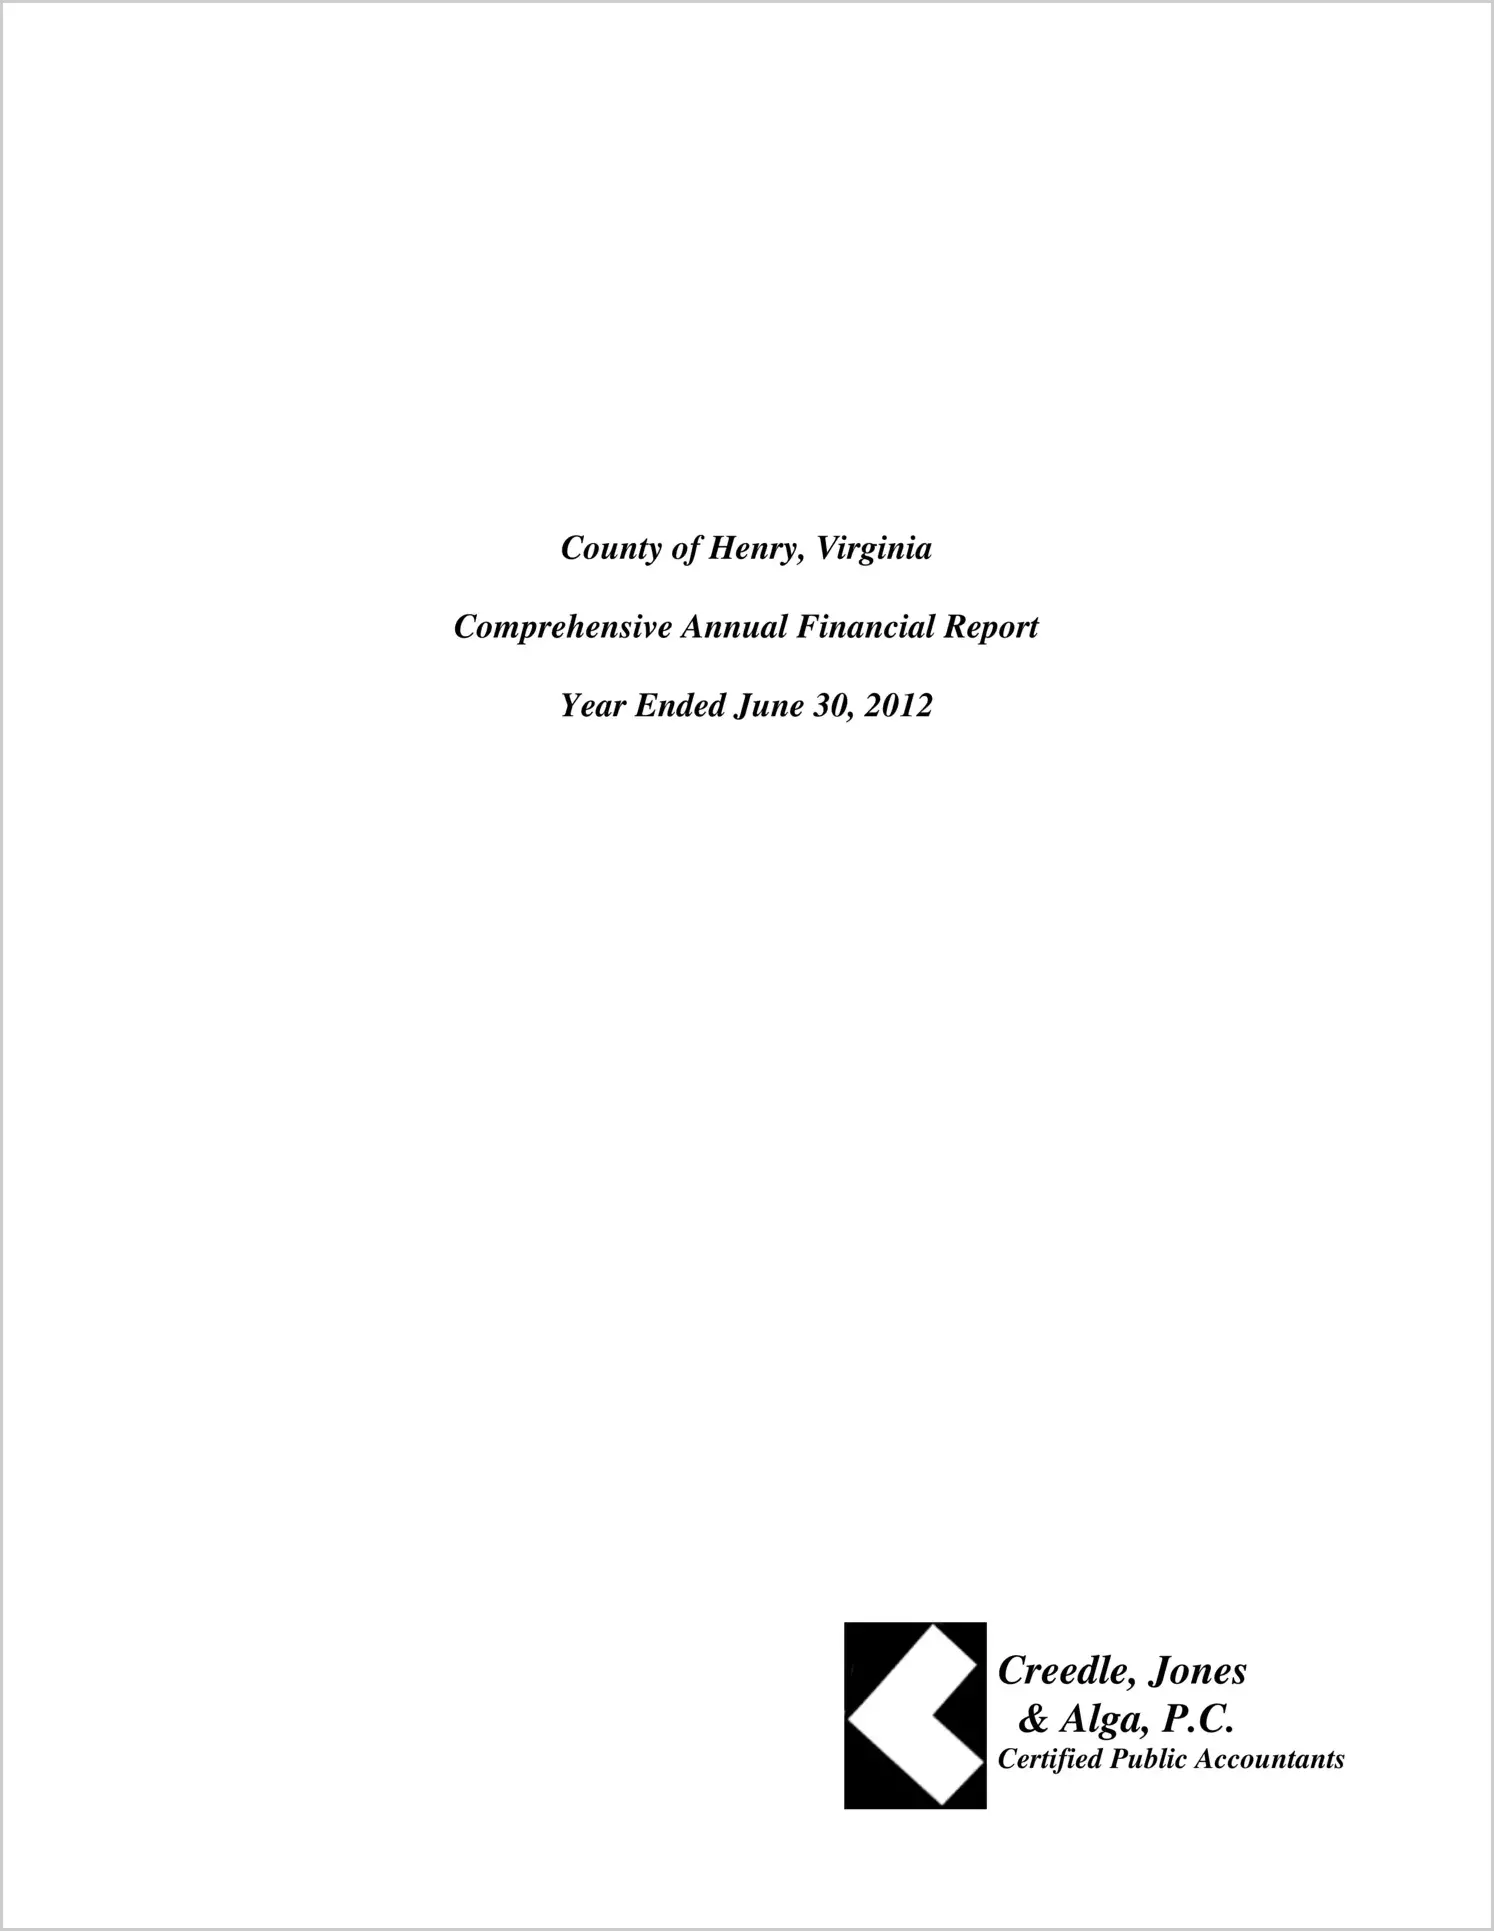 2012 Annual Financial Report for County of Henry